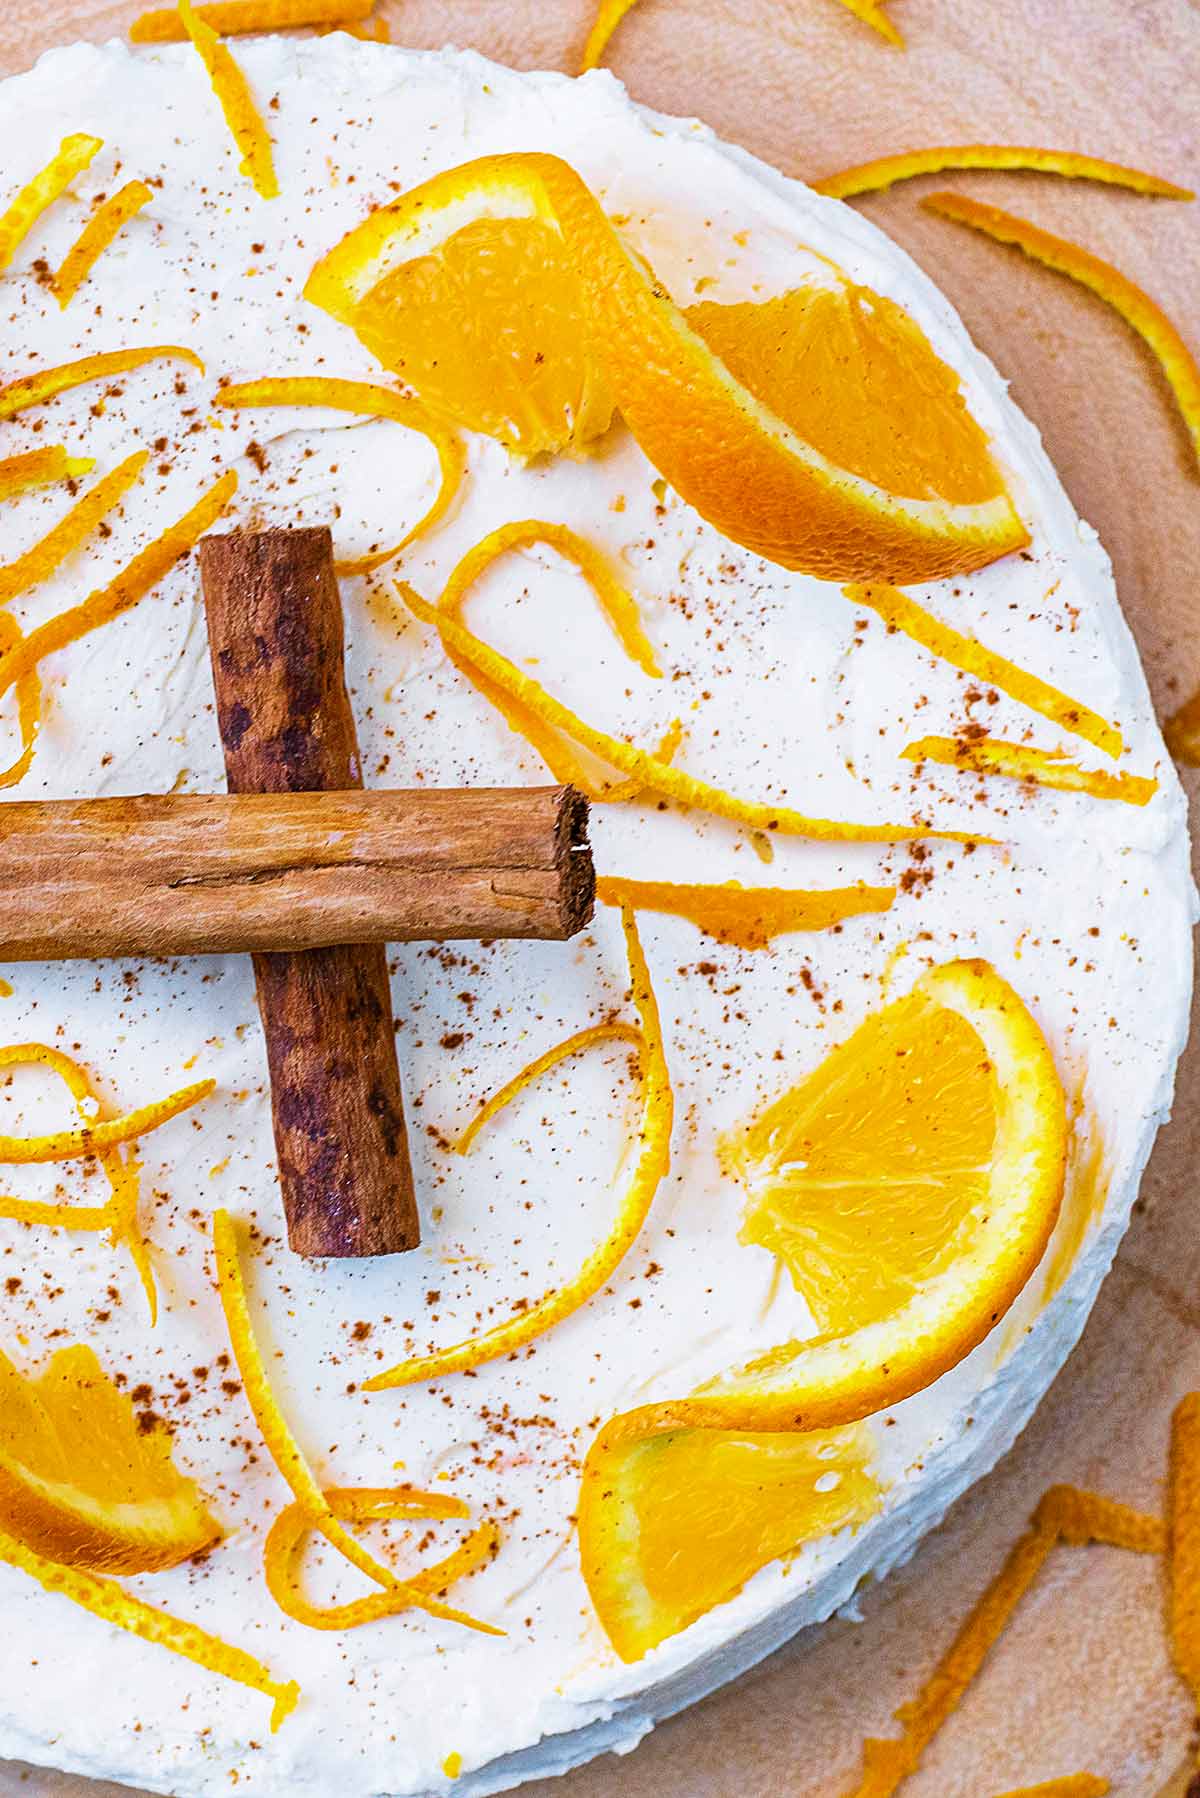 Cheesecake on a board topped with oranges and cinnamon.